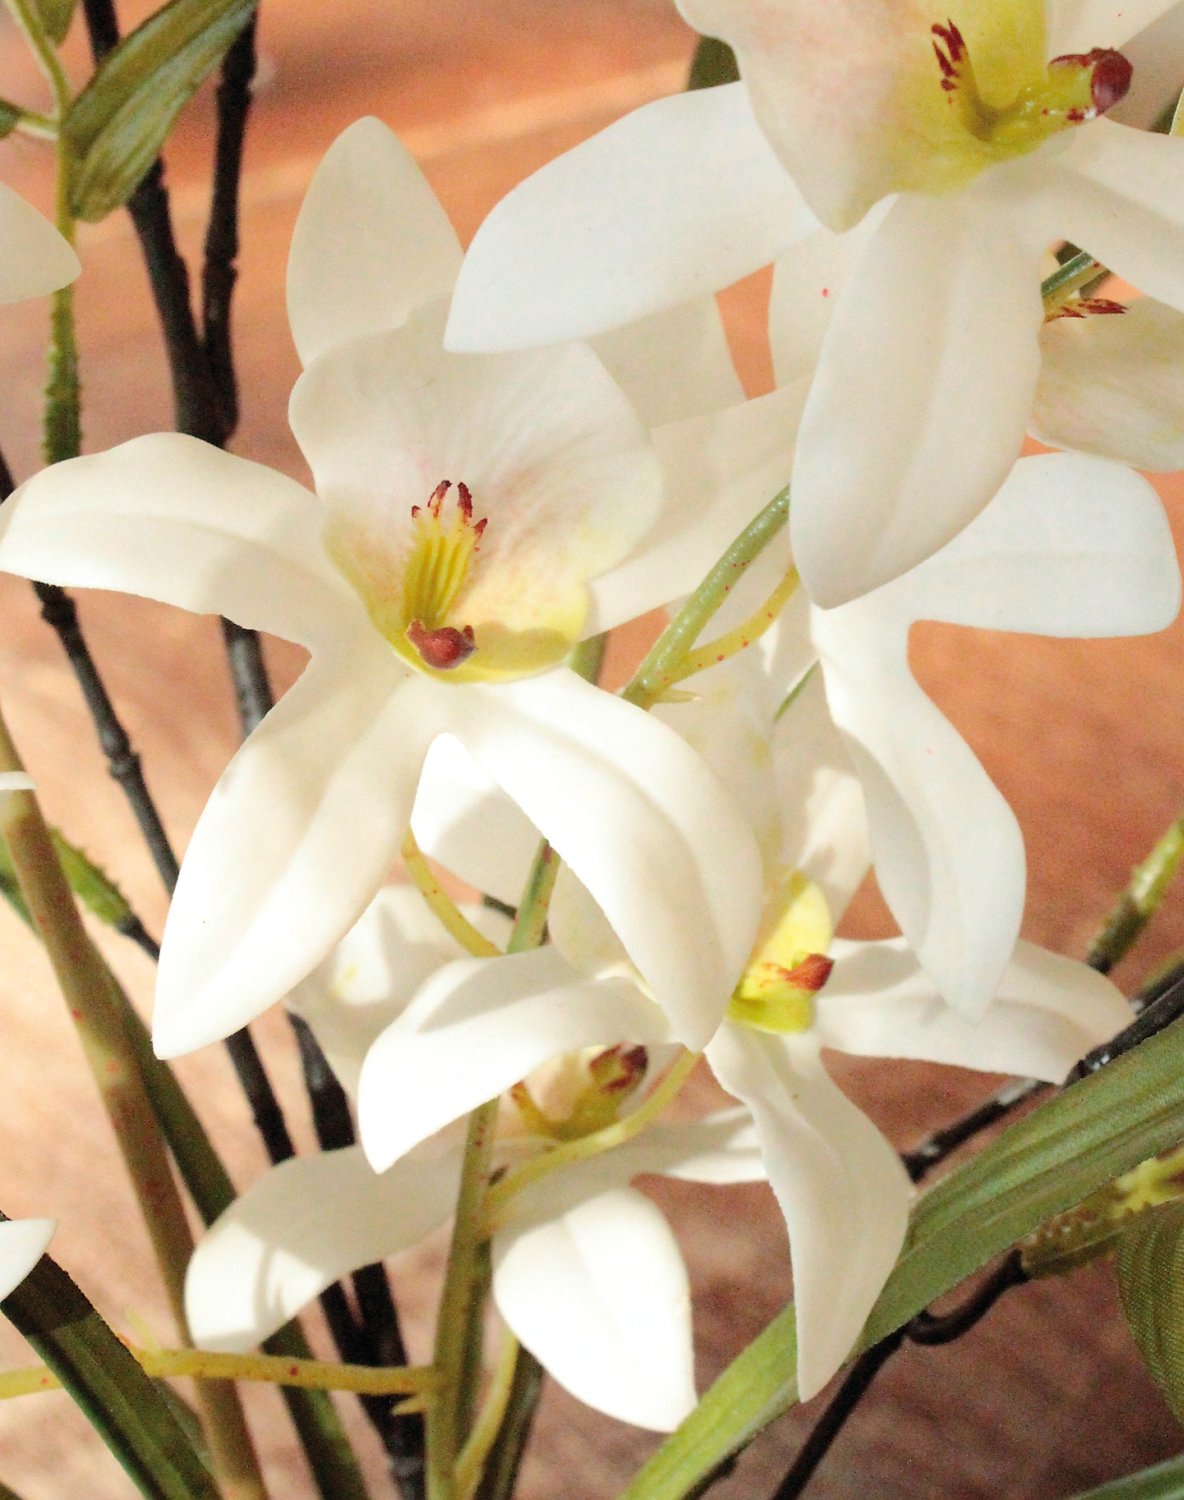 Fake orchid dendrobium & bamboo in 'soil', 57 cm, real touch soft, white-green